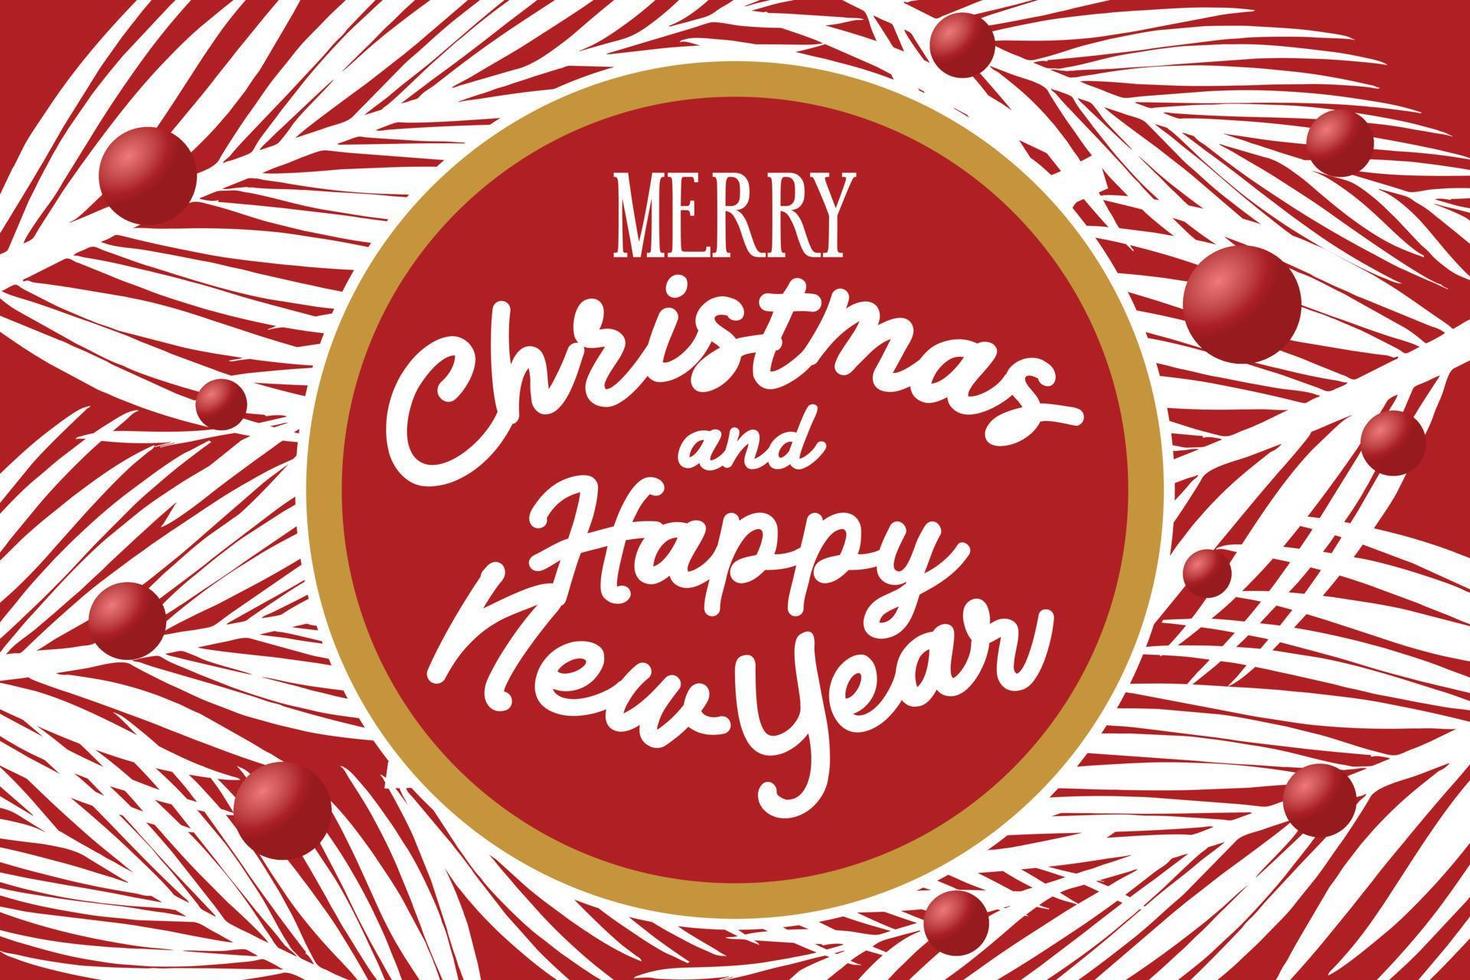 Merry Christmas and happy new year banner vector